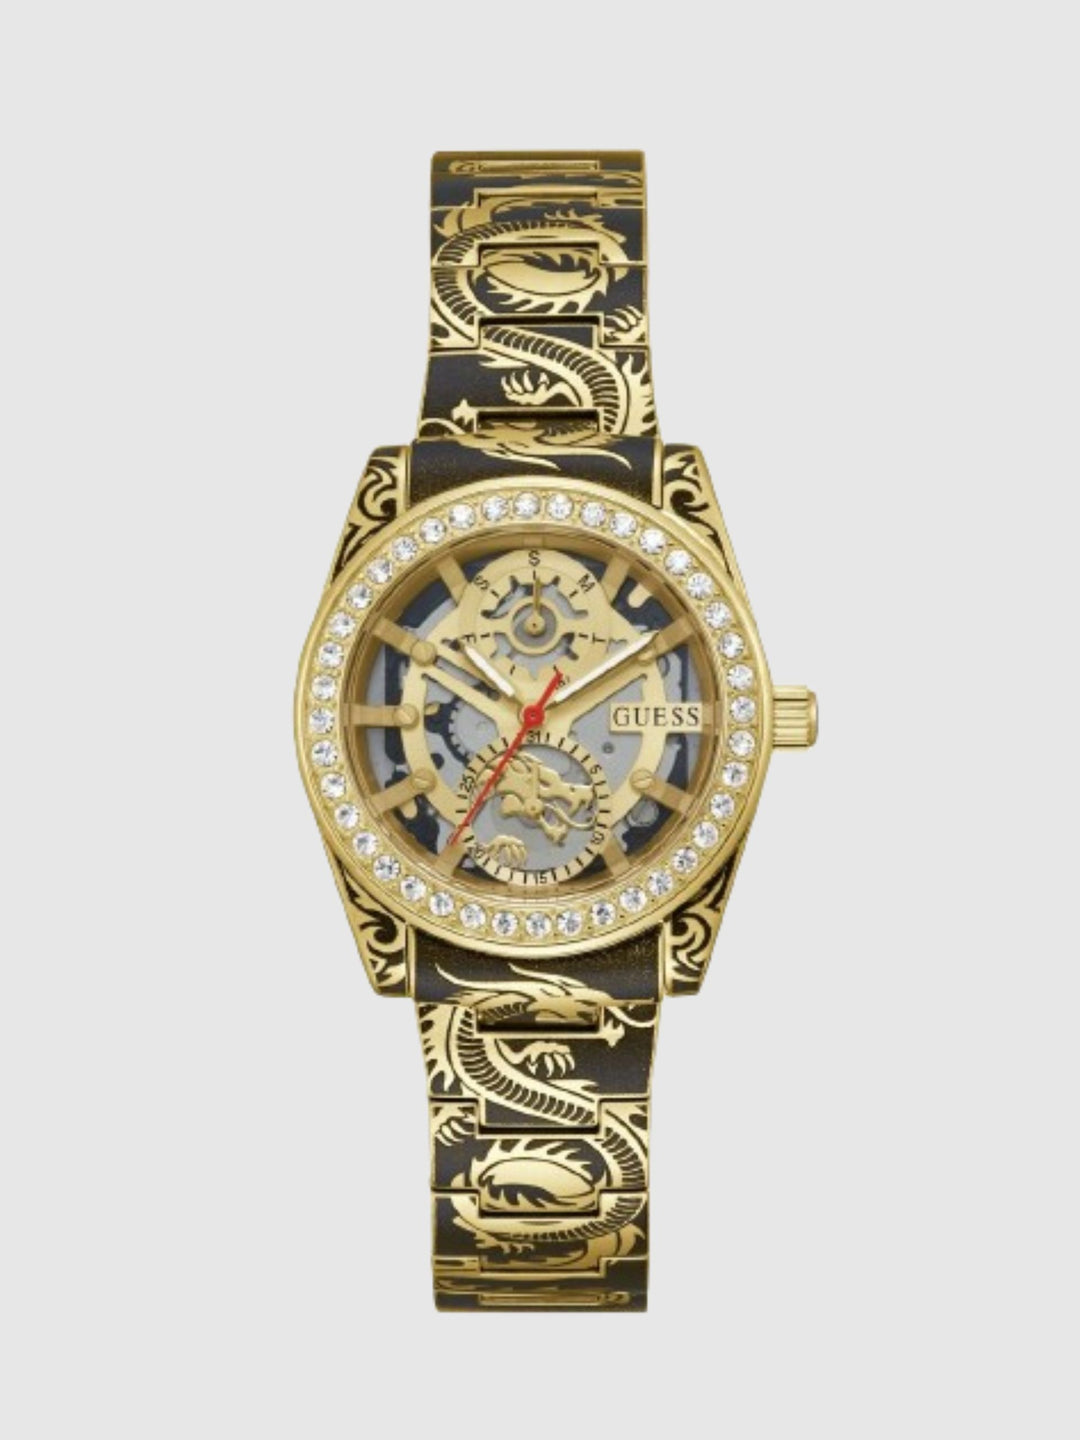 DRAGONESS LADIES 2-TONE MULTI-FUNCTION WATCH – GUESS